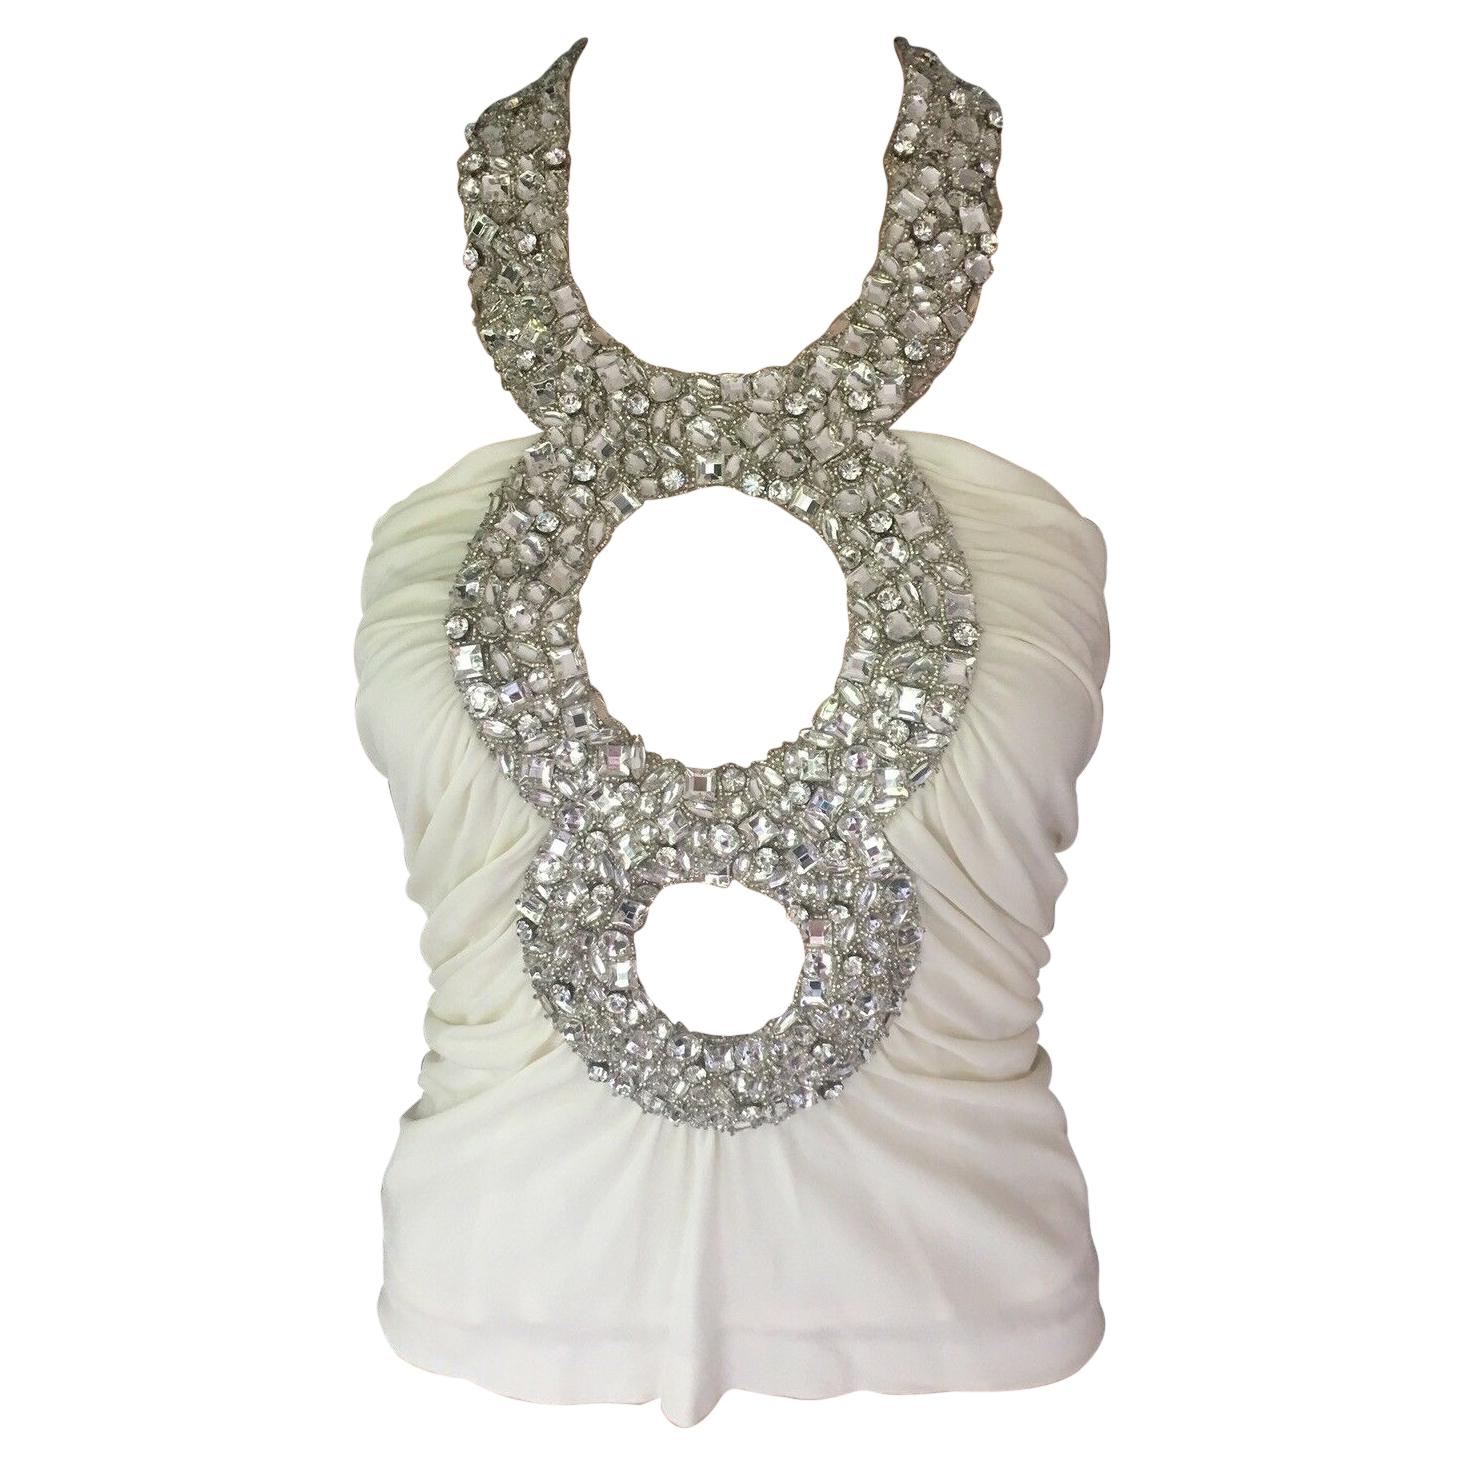 Azzaro Couture Iconic Crystal Embellished Cutout White Top 